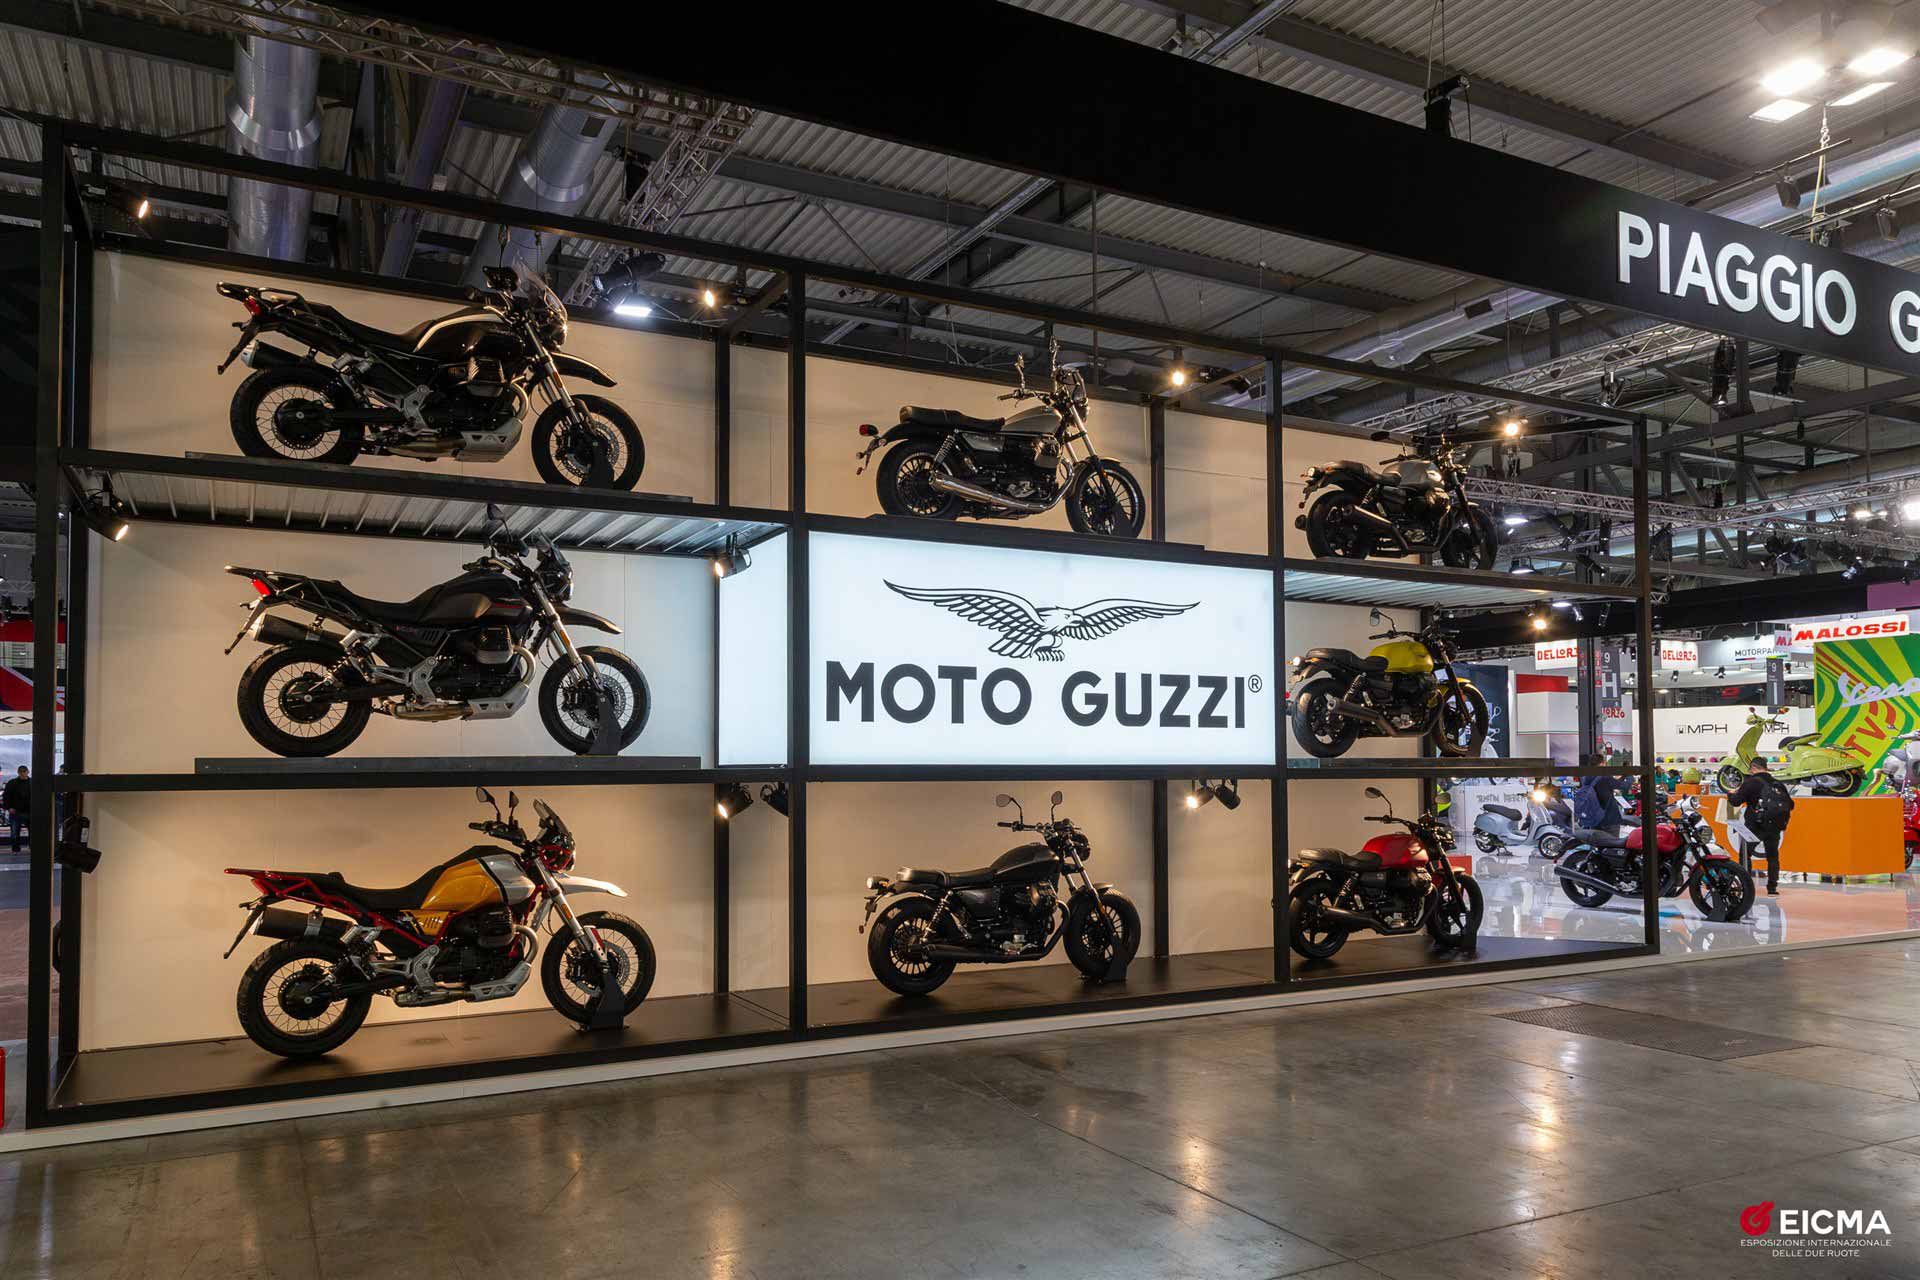 It’s a short drive from Mandello to Milan, so Moto Guzzi made the most of it.